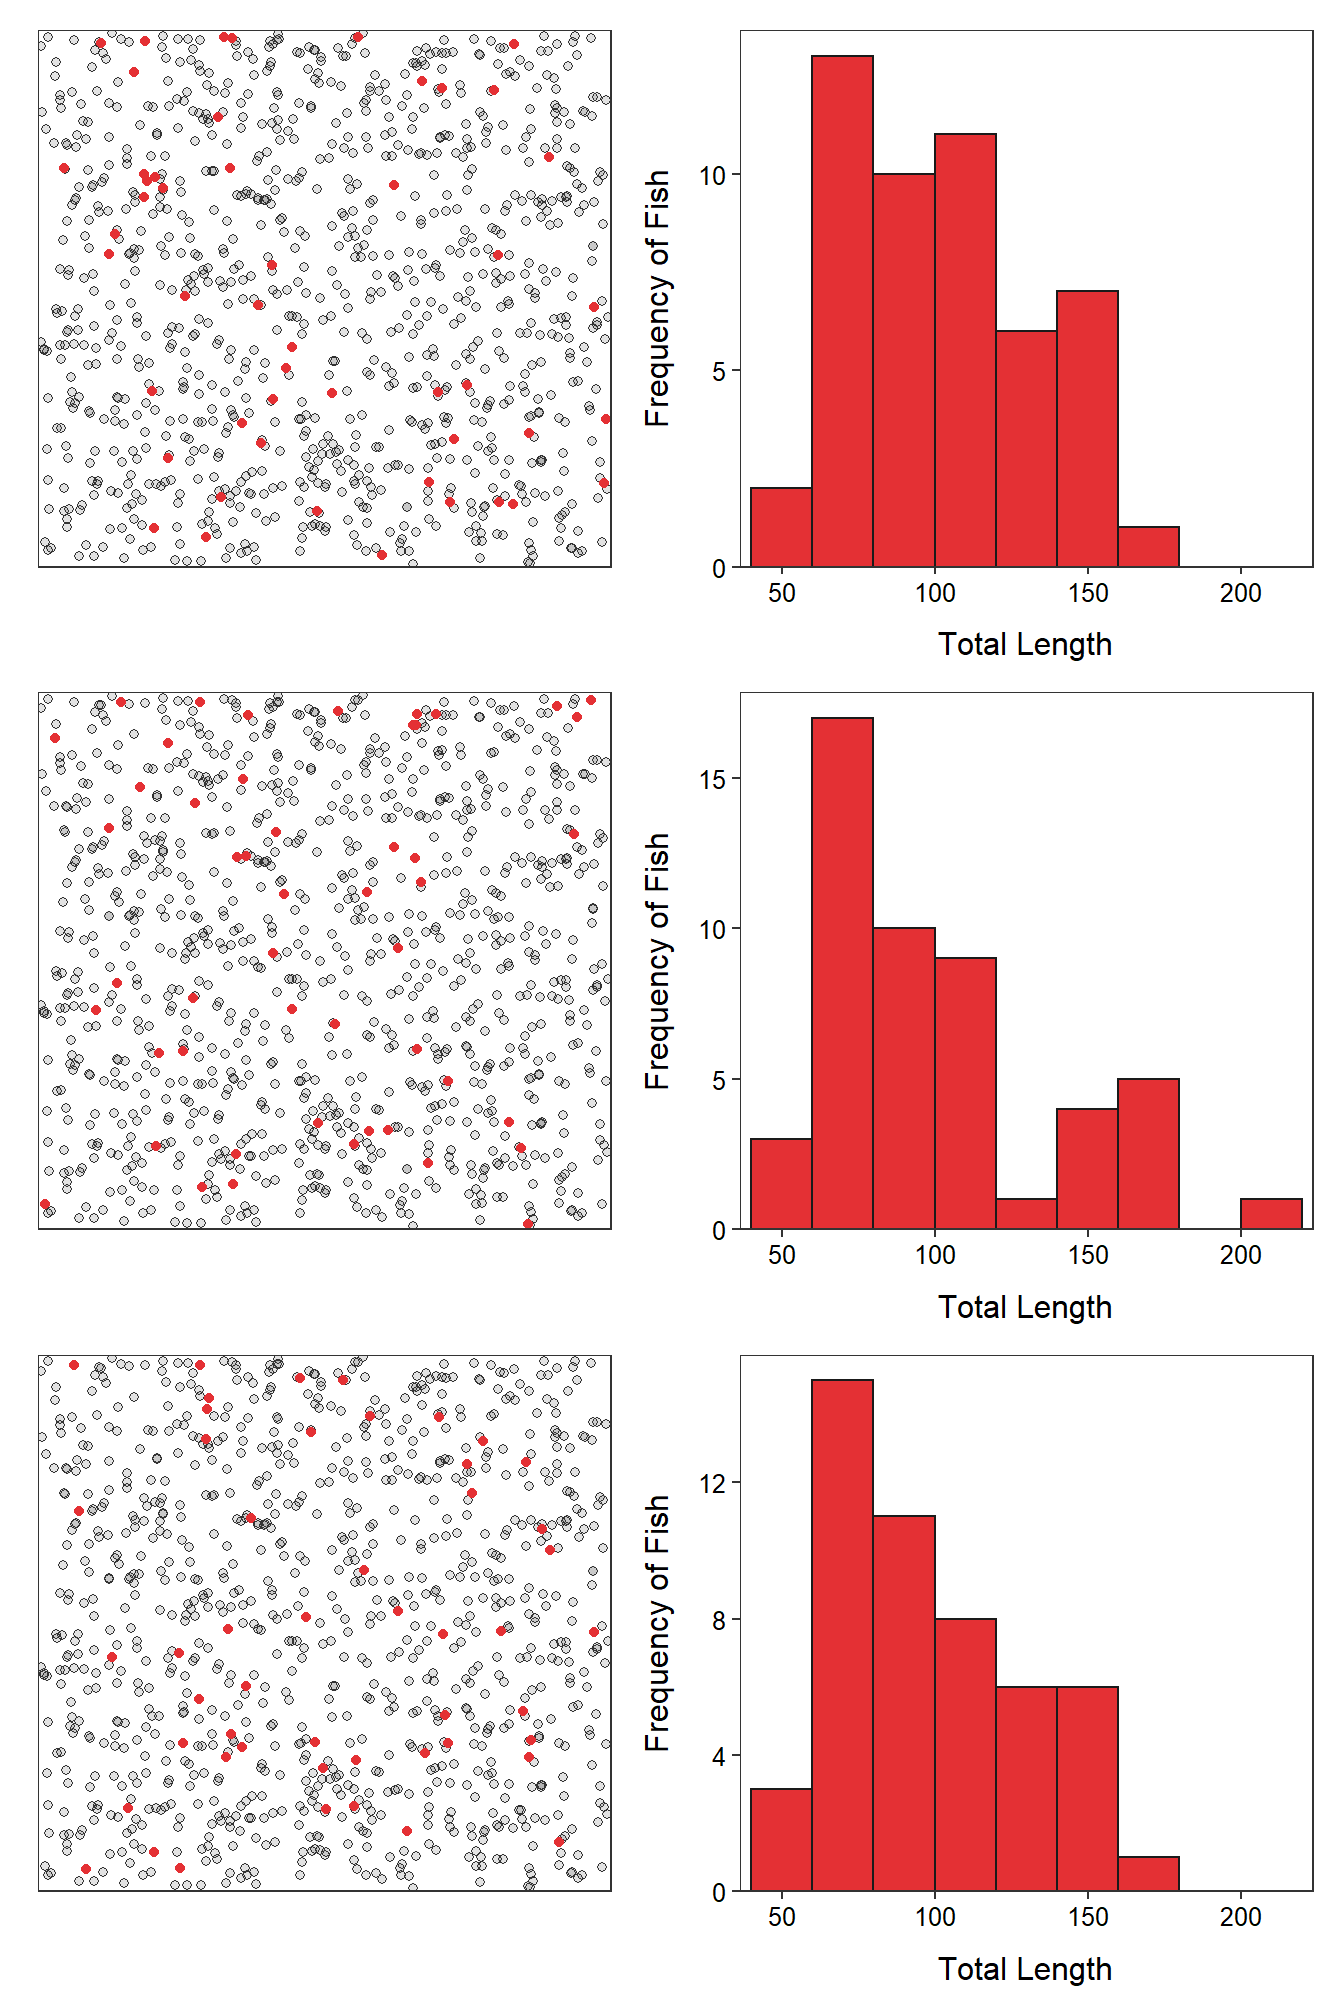 Schematic representation (**Left**) of three samples of 50 fish (i.e., red dots) from Square Lake and histograms (**Right**) of the total length of the 50 fish in each sample.